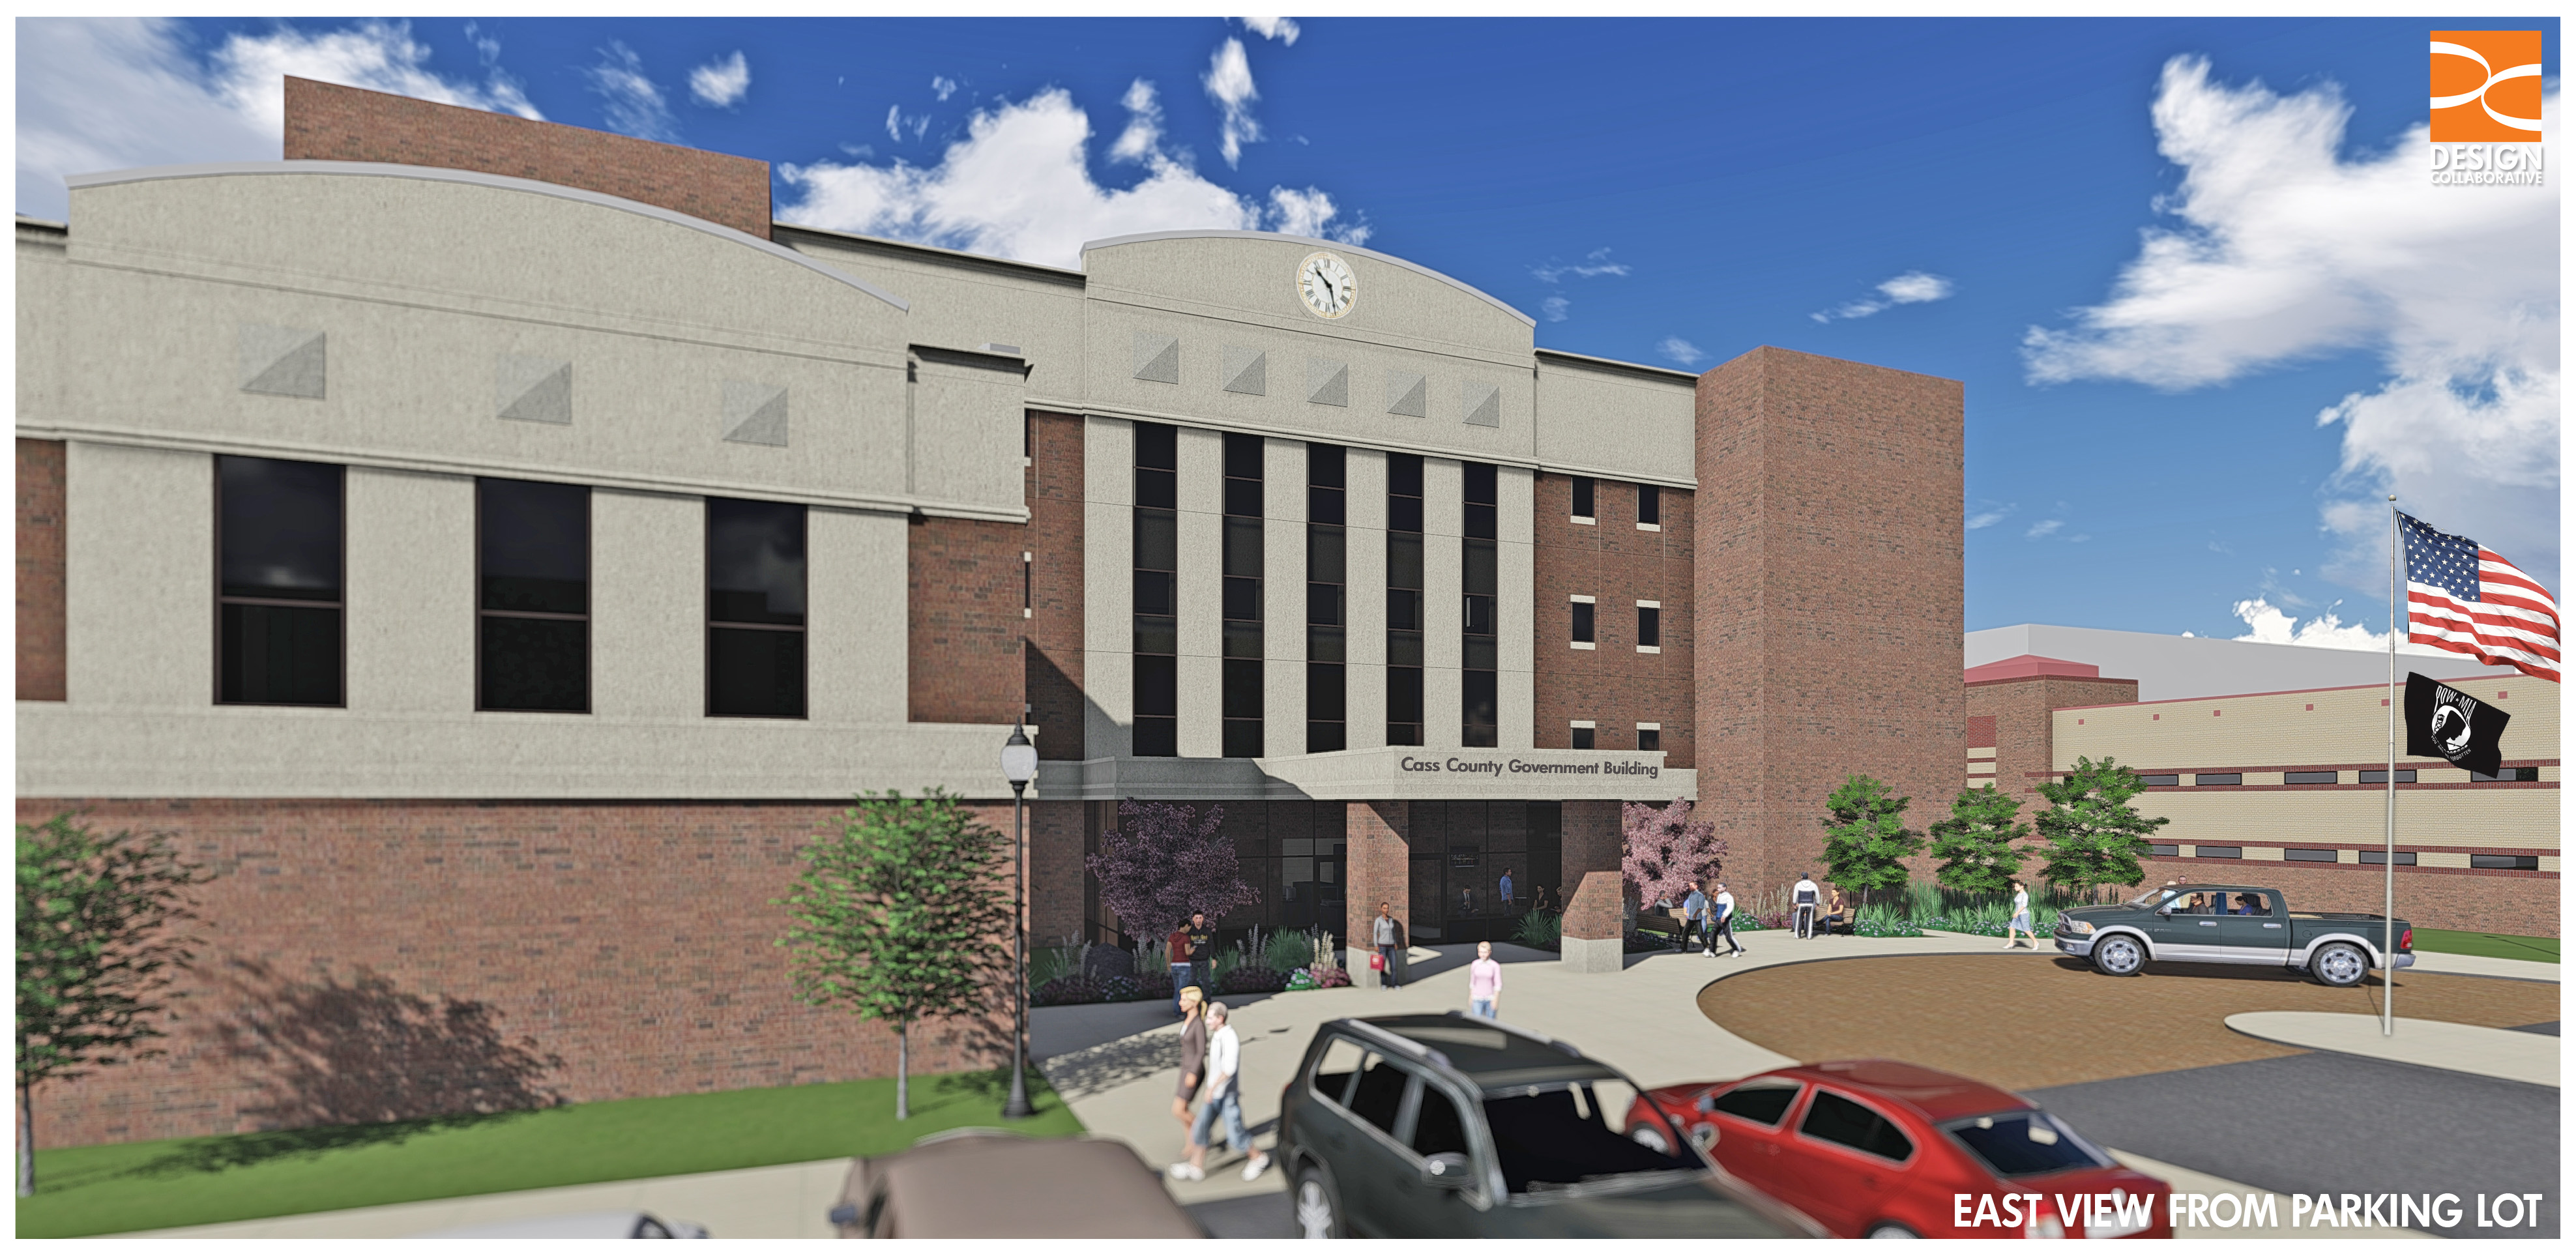 Thumbnail for the post titled: Renovations underway at Cass County Government Building